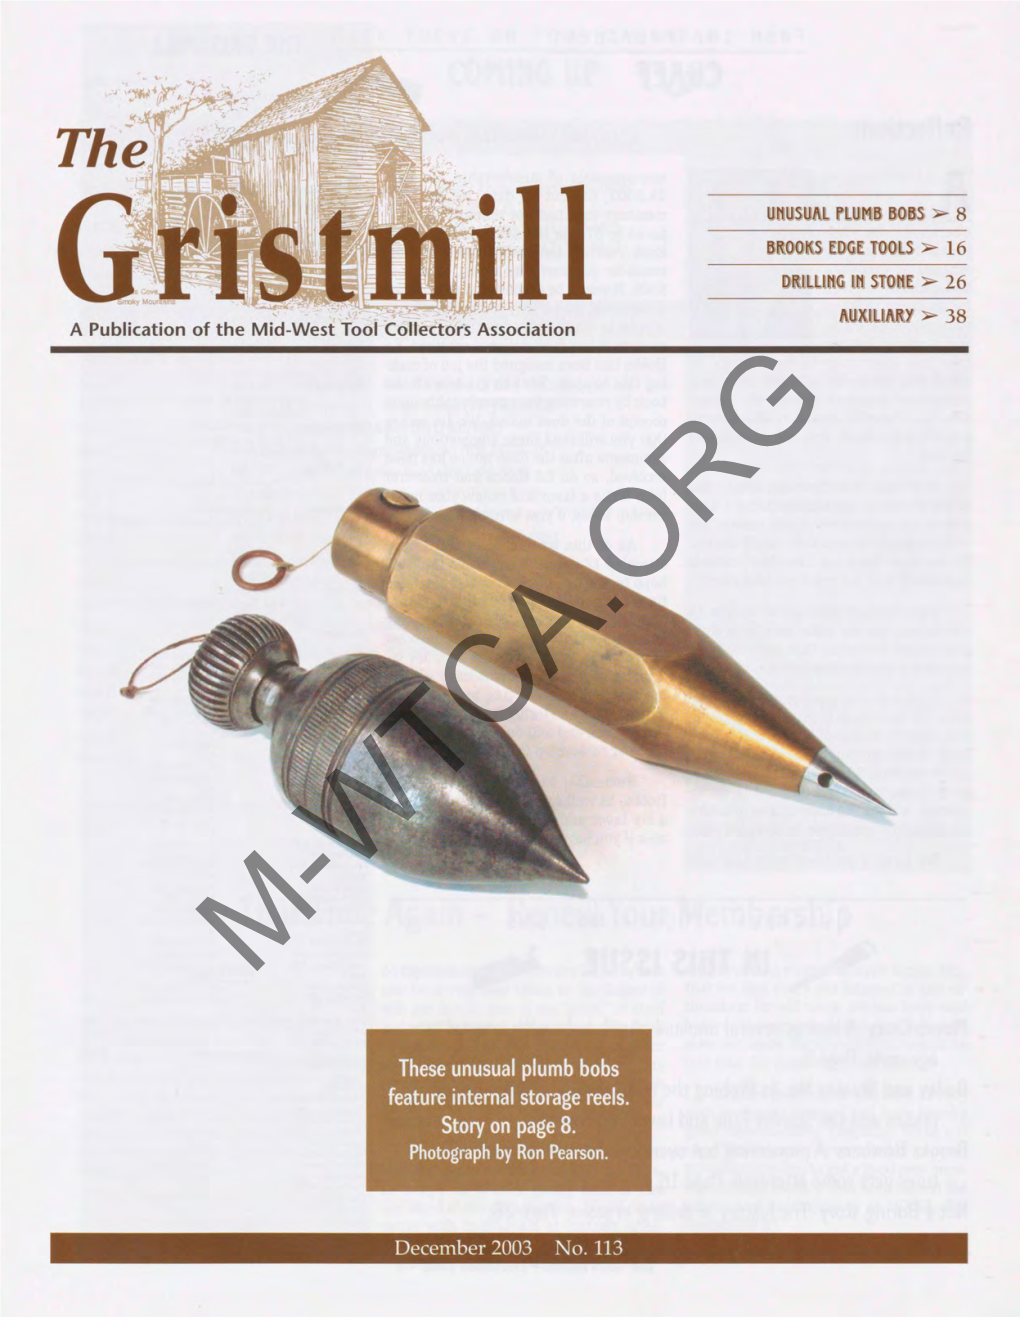 These Unusual Plumb Bobs Feature Internal Storage Reels. Story on Page 8